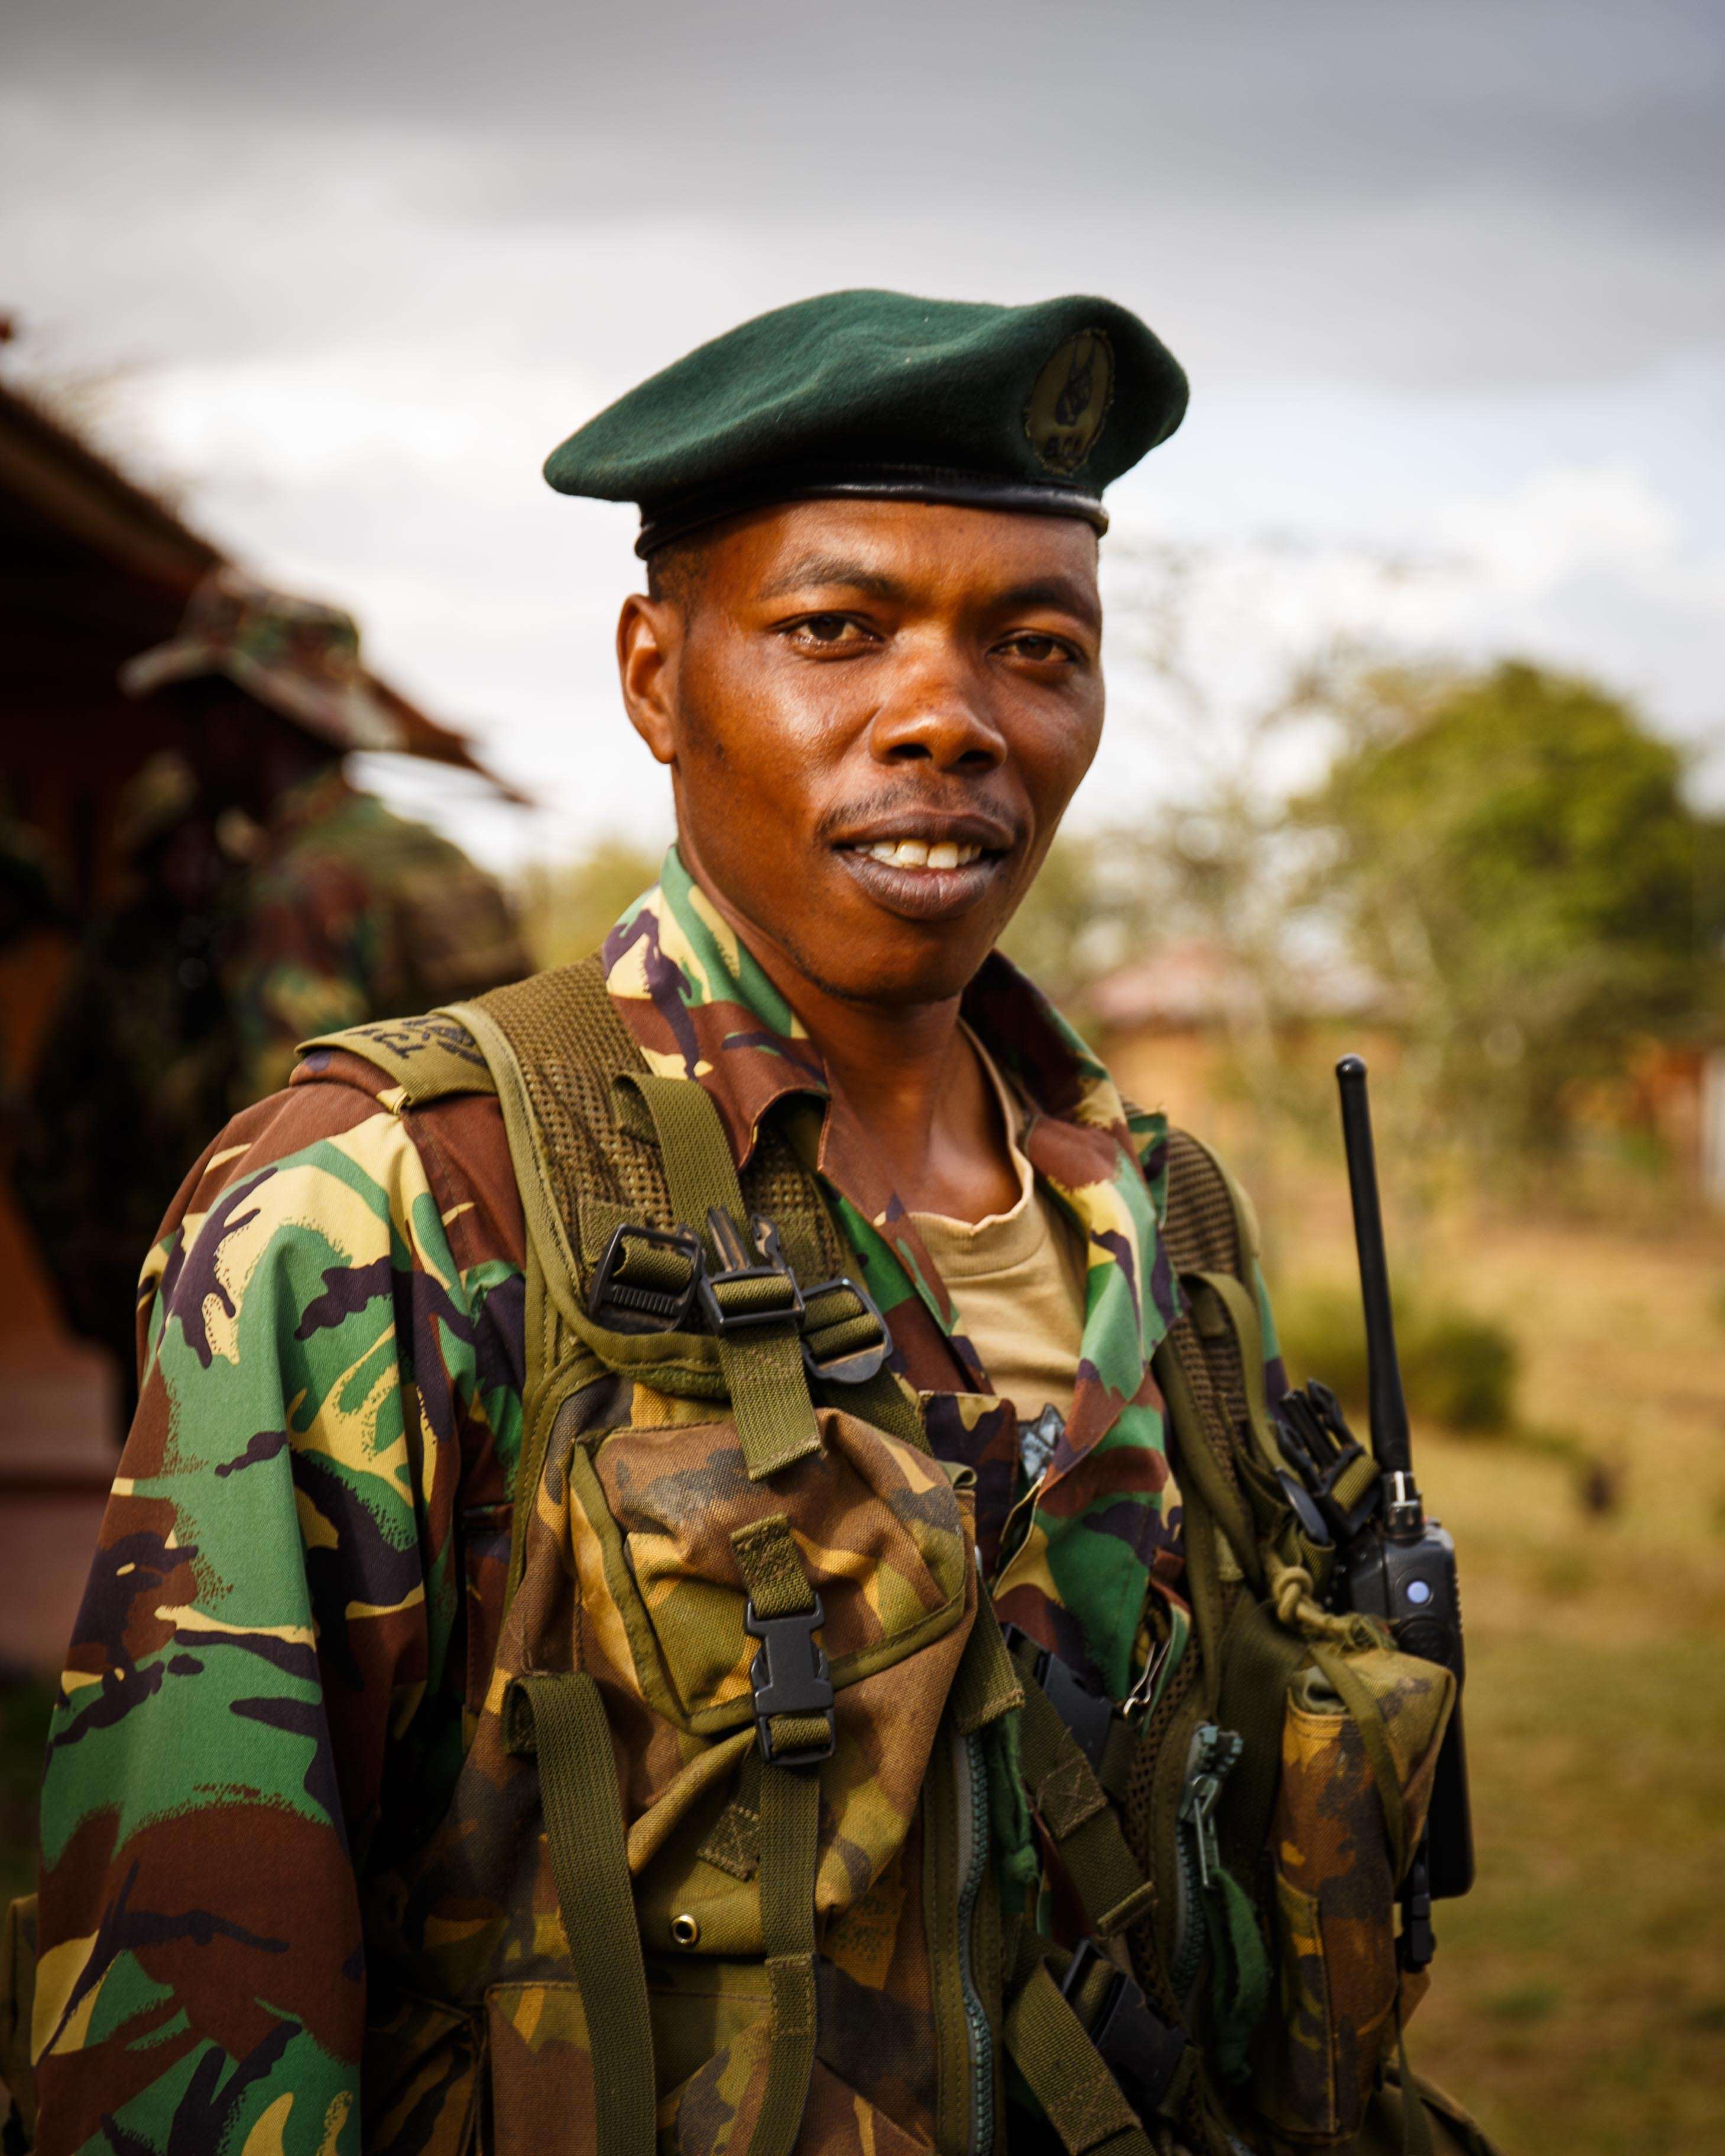 The Borana Conservancy in central Kenya employs rangers like Rianto to protect wildlife day and night against poachers who are ready to kill or be killed. Photo: Tessa Chan